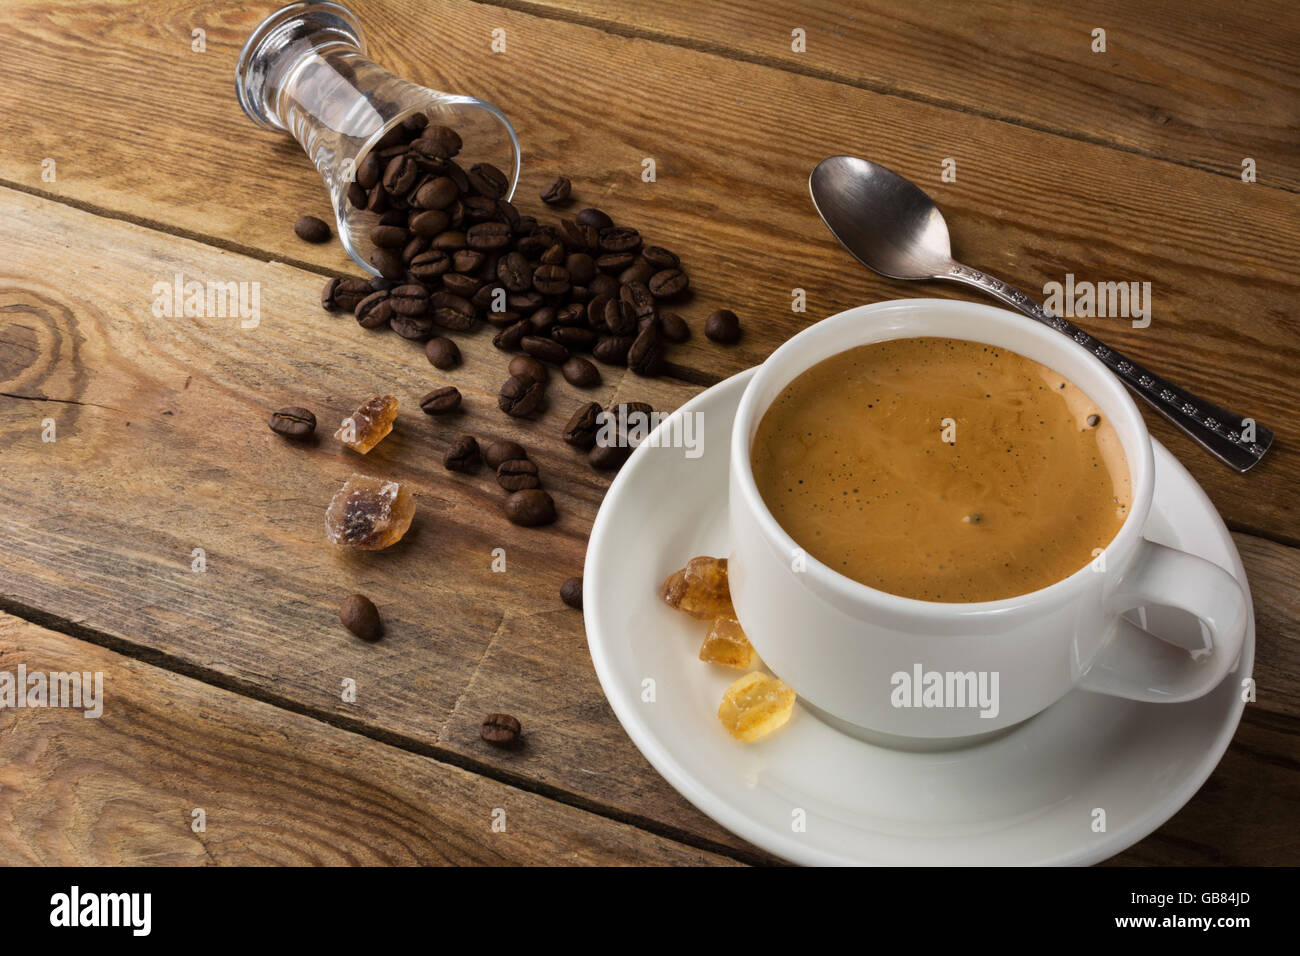 Coffee grains and cup of coffee. Coffee cup. Strong coffee. Coffee mug. Morning coffee. Cup of coffee. Coffee break. Stock Photo